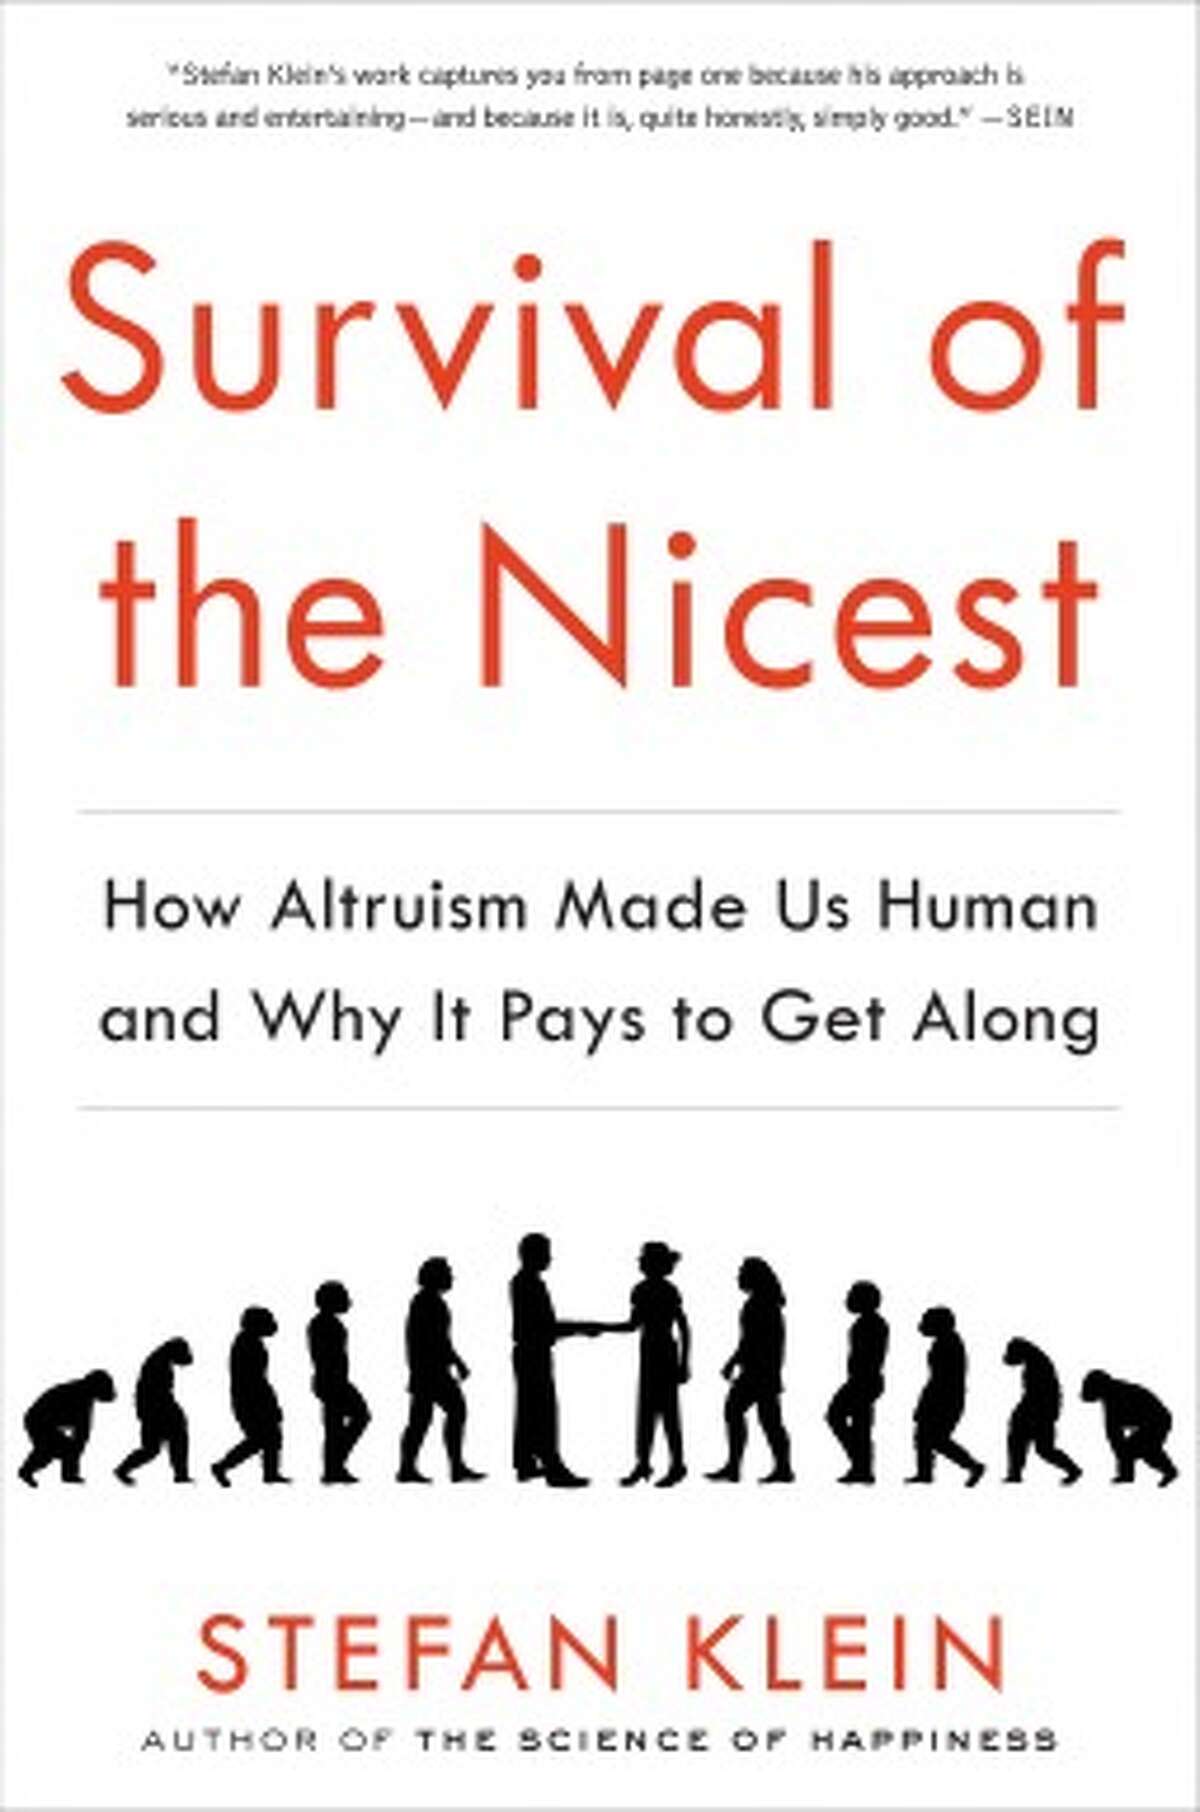 That old baseball axiom is wrong, Stefan Klein argues: Nice guys don't finish last. Klein makes his case in "Survival of the Nicest: How Altruism Made Us Human and Why it Pays to Get Along." (The Experiment; January 2014)